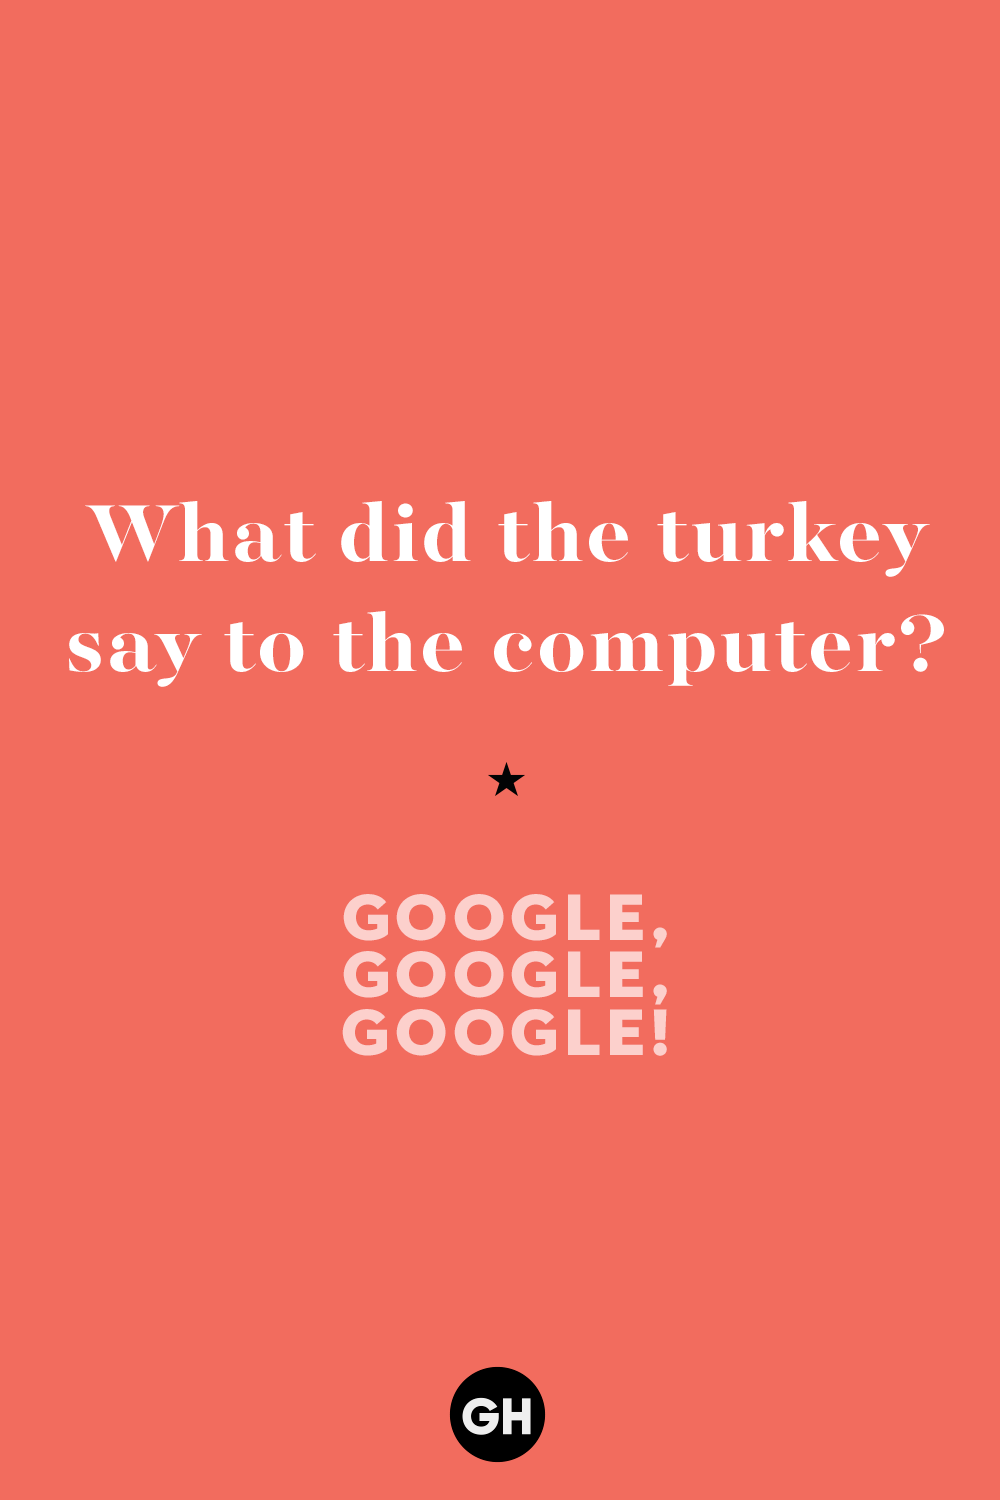 56 Funny Thanksgiving Jokes & Riddles to Crack Everyone Up